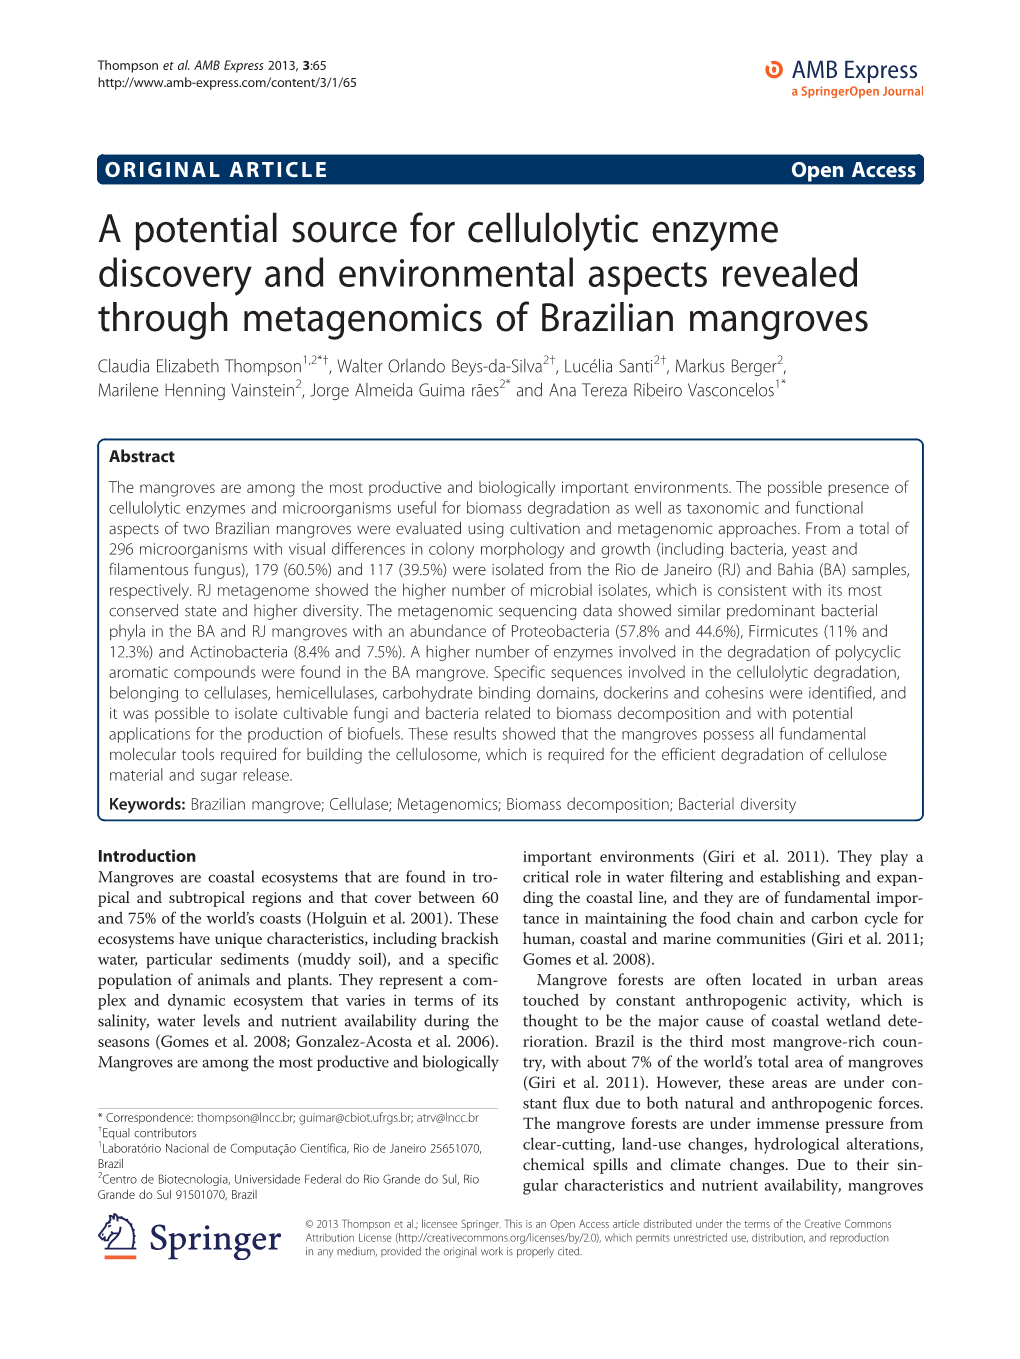 A Potential Source for Cellulolytic Enzyme Discovery And